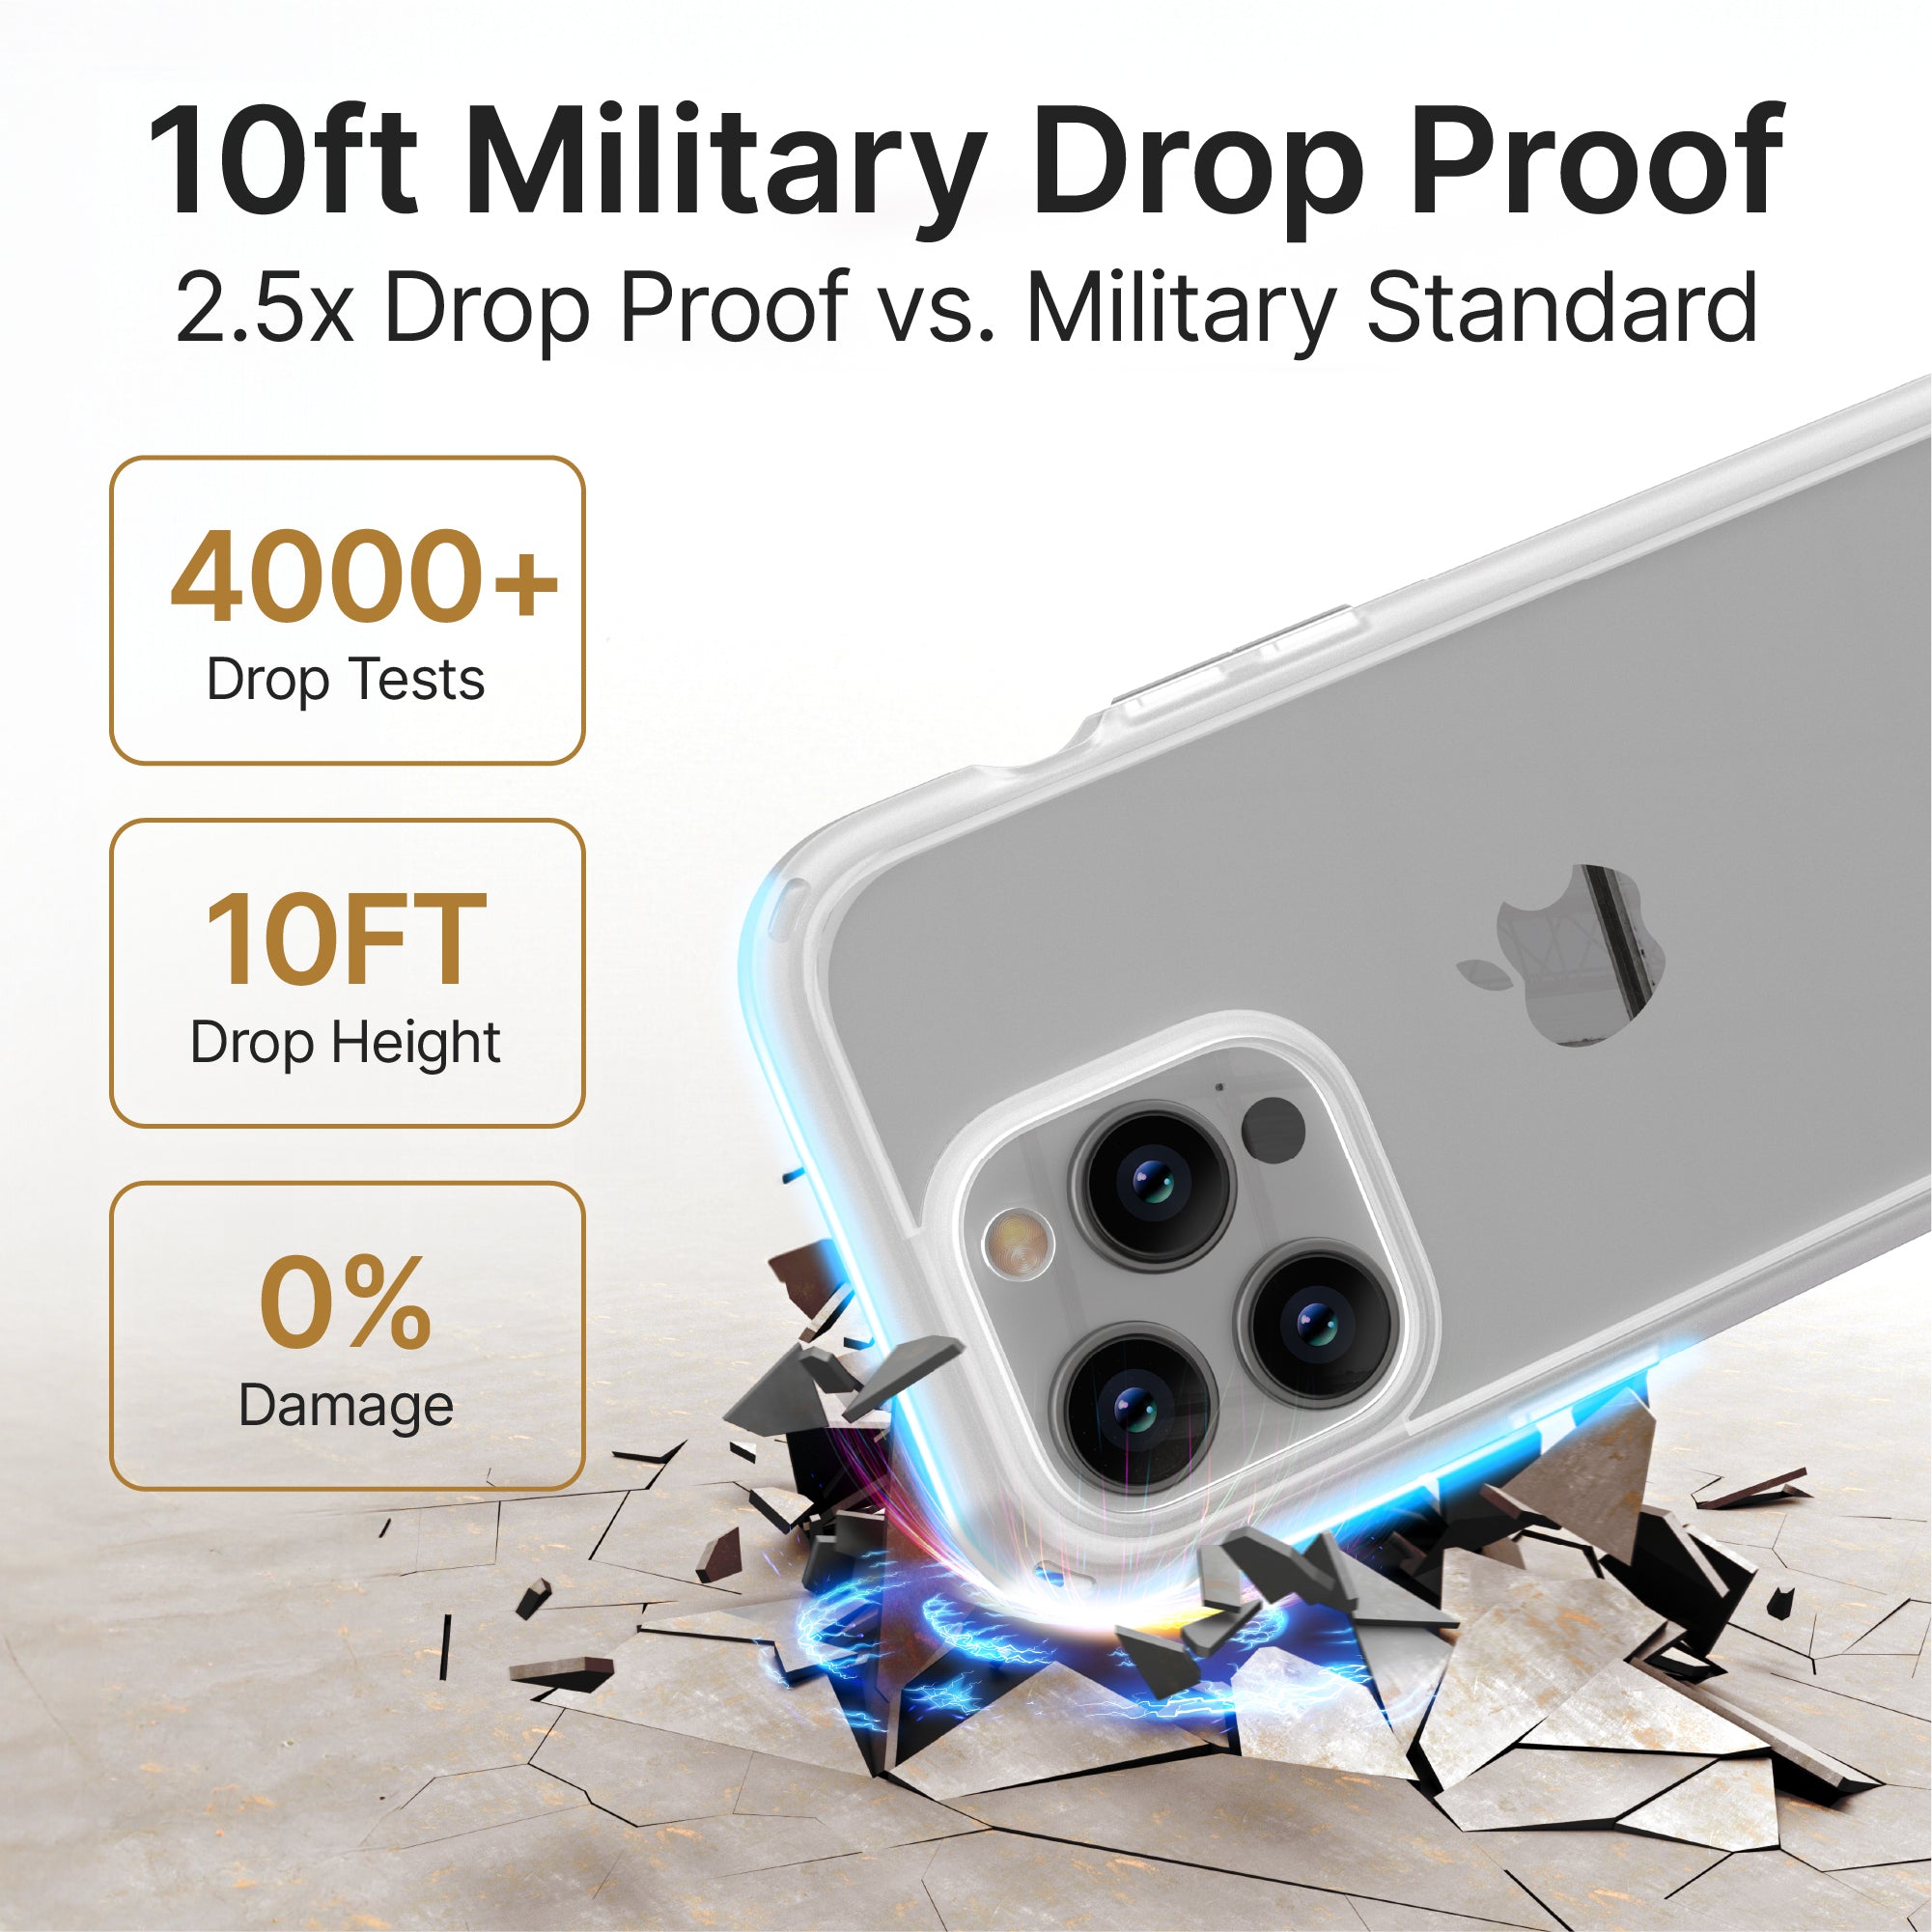 Catalyst iphone 15 series influence case iphone 15 pro in clear colorway showing the durability of the case text reads 10ft military drop proof 2.5 x drop proof vs. military standard 4000+ drop tests 10ft drop height 0% damage